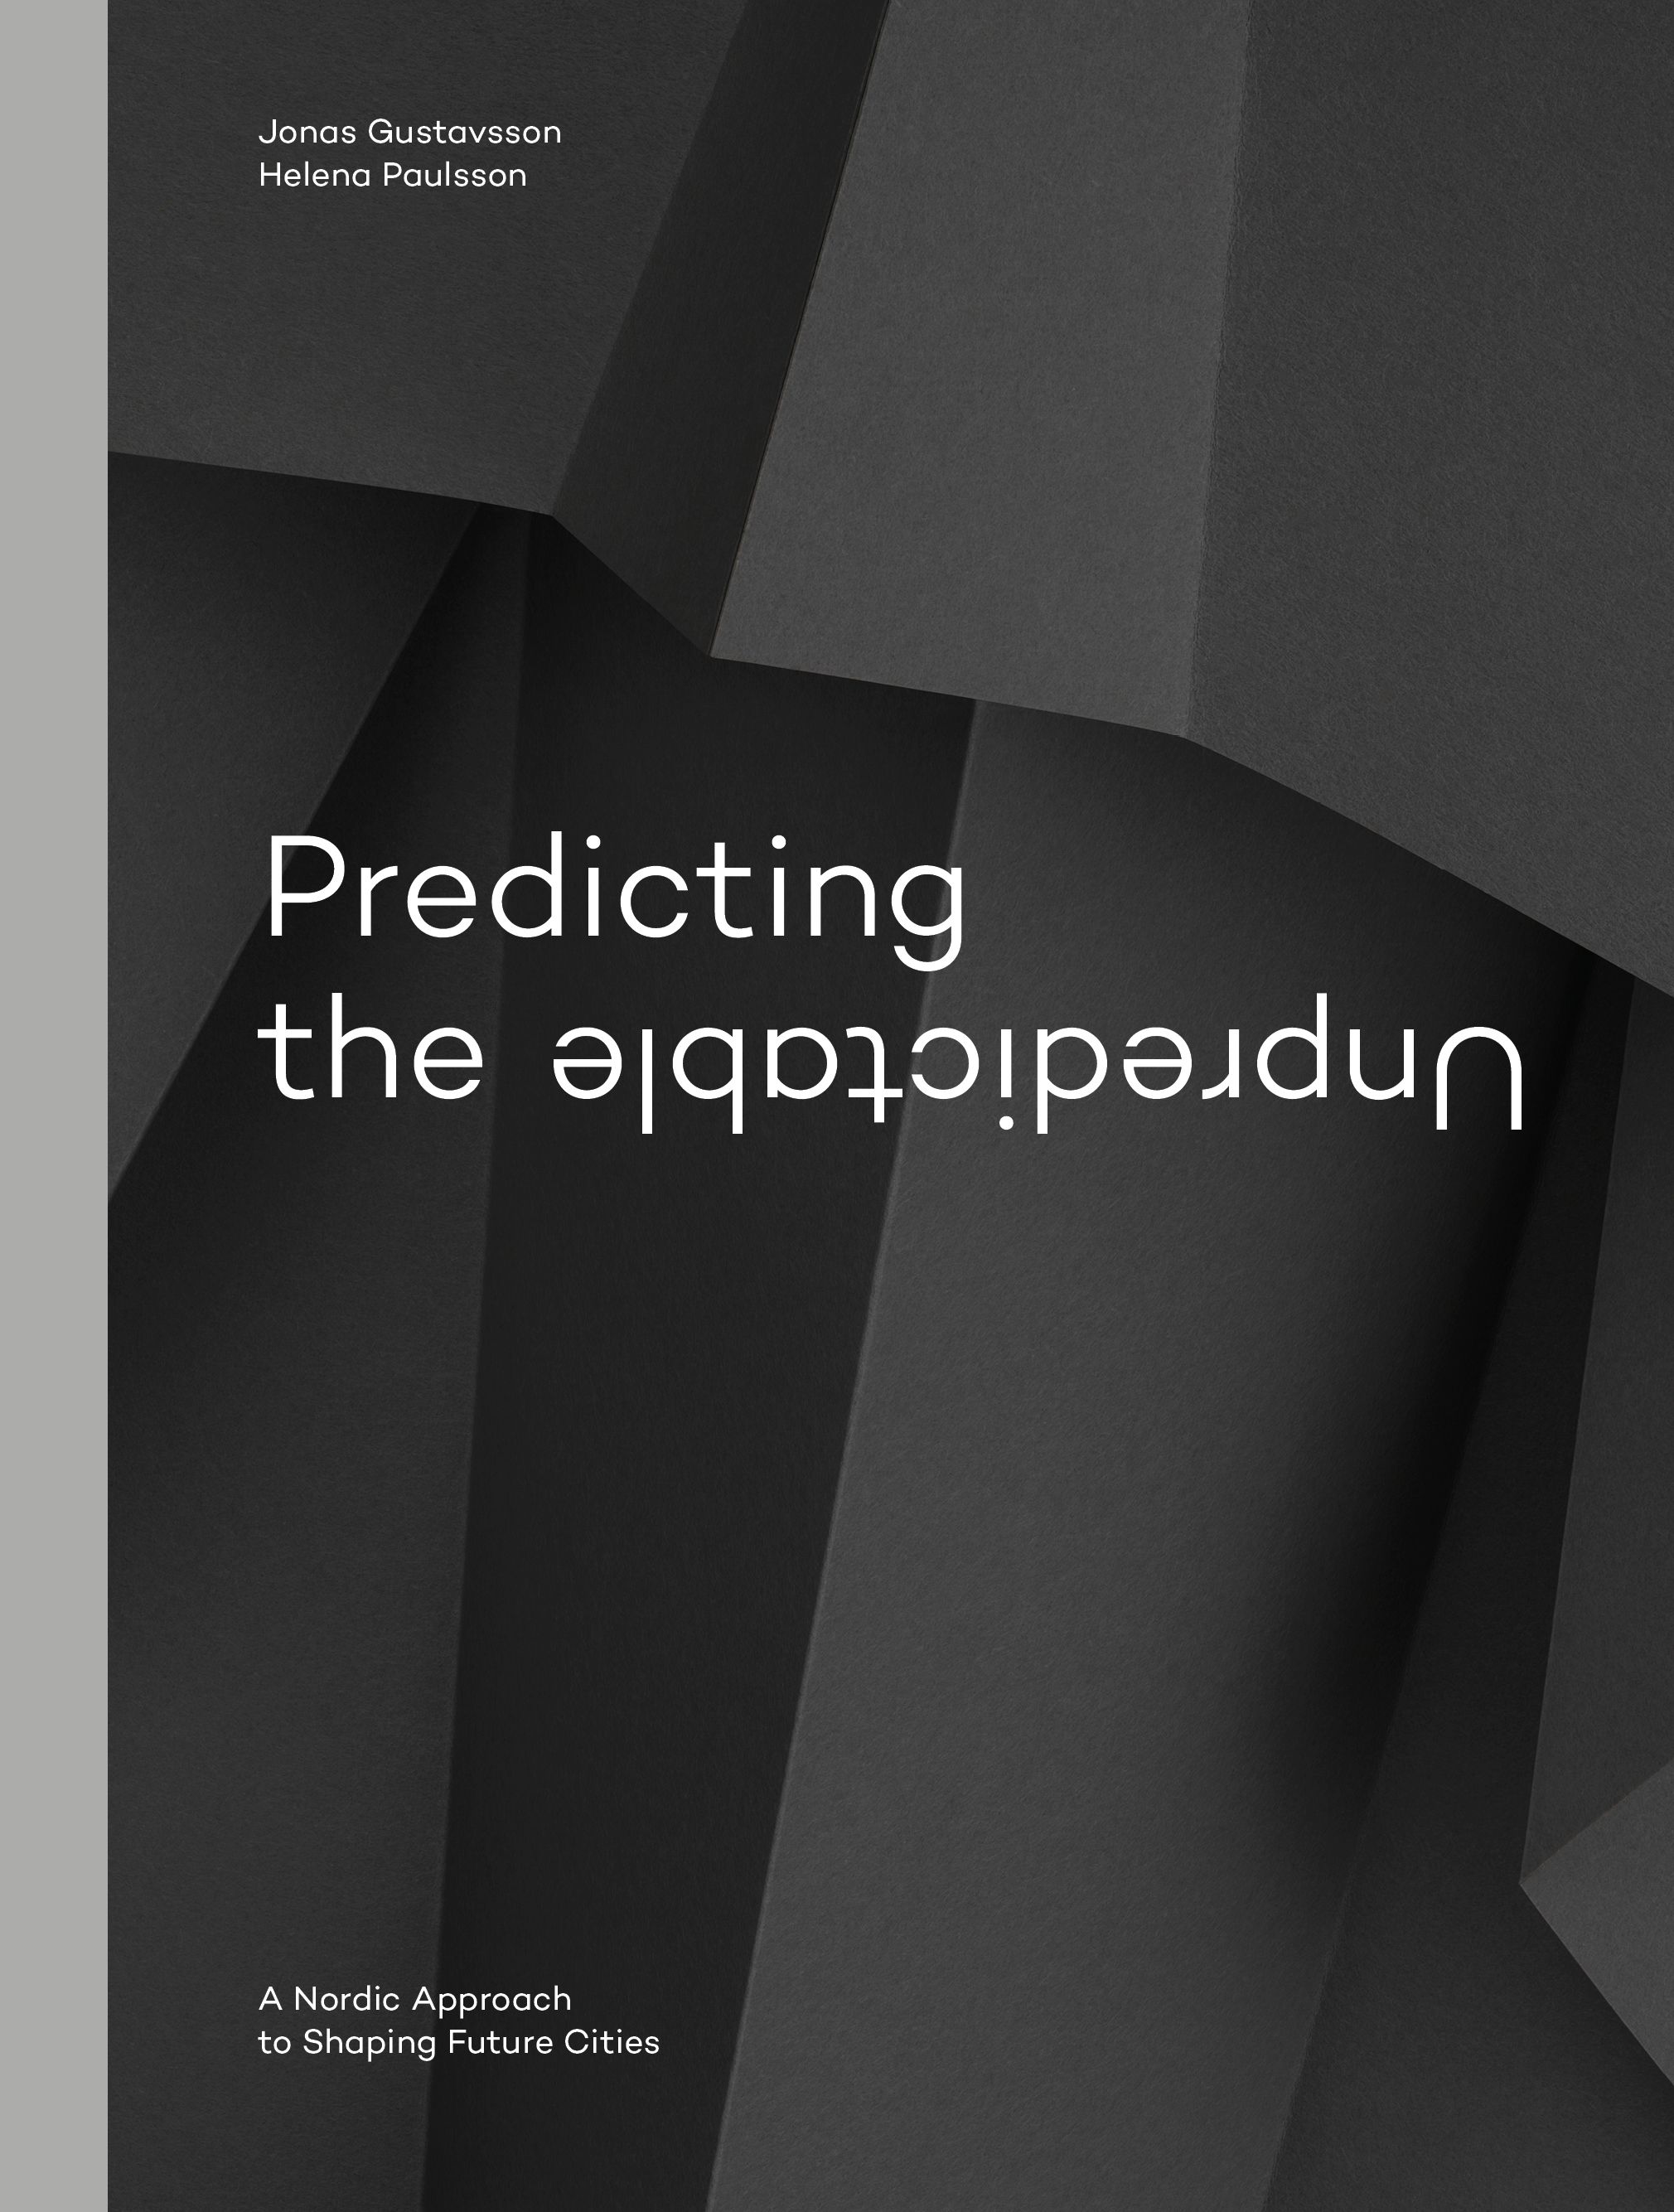 Predicting the Unpredictable – a Nordic Approach to Shaping Future Cities, eBook by Jonas Gustavsson, Helena Paulsson